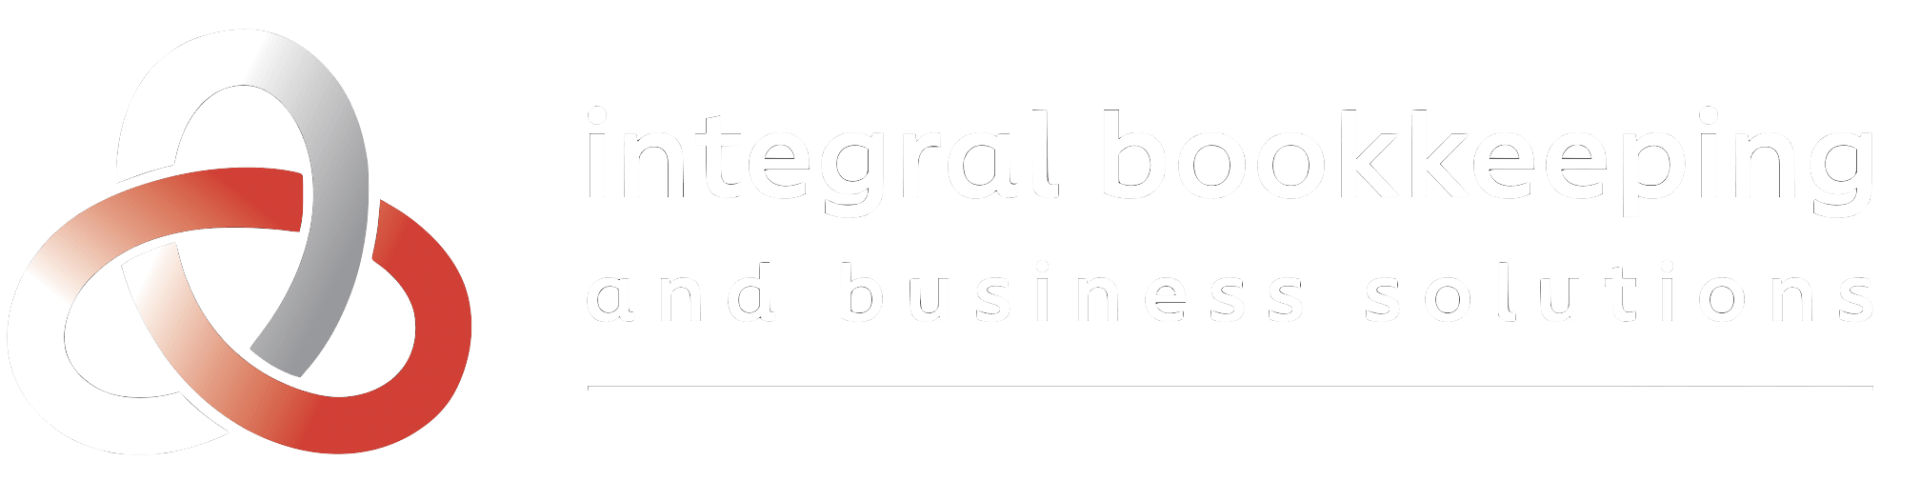 Integral Bookkeeping & Business Solutions: Hire Bookkeepers in Townsville